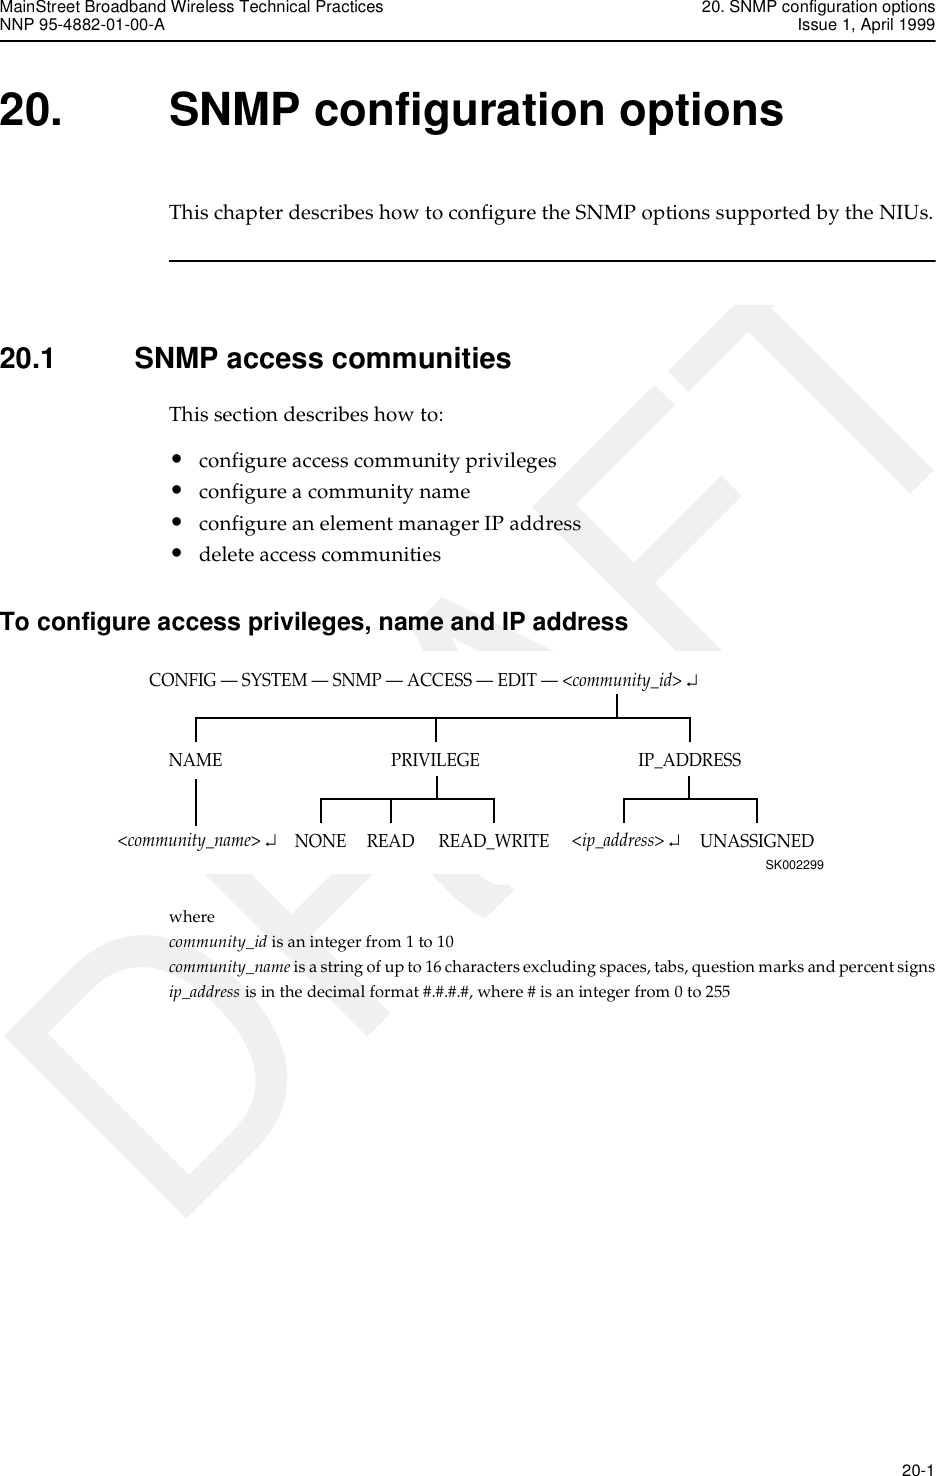 MainStreet Broadband Wireless Technical Practices 20. SNMP configuration optionsNNP 95-4882-01-00-A Issue 1, April 1999   20-1DRAFT20. SNMP configuration optionsThis chapter describes how to configure the SNMP options supported by the NIUs.20.1 SNMP access communitiesThis section describes how to:•configure access community privileges•configure a community name•configure an element manager IP address•delete access communitiesTo configure access privileges, name and IP addresswhere community_id is an integer from 1 to 10community_name is a string of up to 16 characters excluding spaces, tabs, question marks and percent signsip_address is in the decimal format #.#.#.#, where # is an integer from 0 to 255CONFIG — SYSTEM — SNMP — ACCESS — EDIT — &lt;community_id&gt; ↵SK002299IP_ADDRESSNAME PRIVILEGEREAD_WRITENONE UNASSIGNEDREAD&lt;community_name&gt; ↵&lt;ip_address&gt; ↵